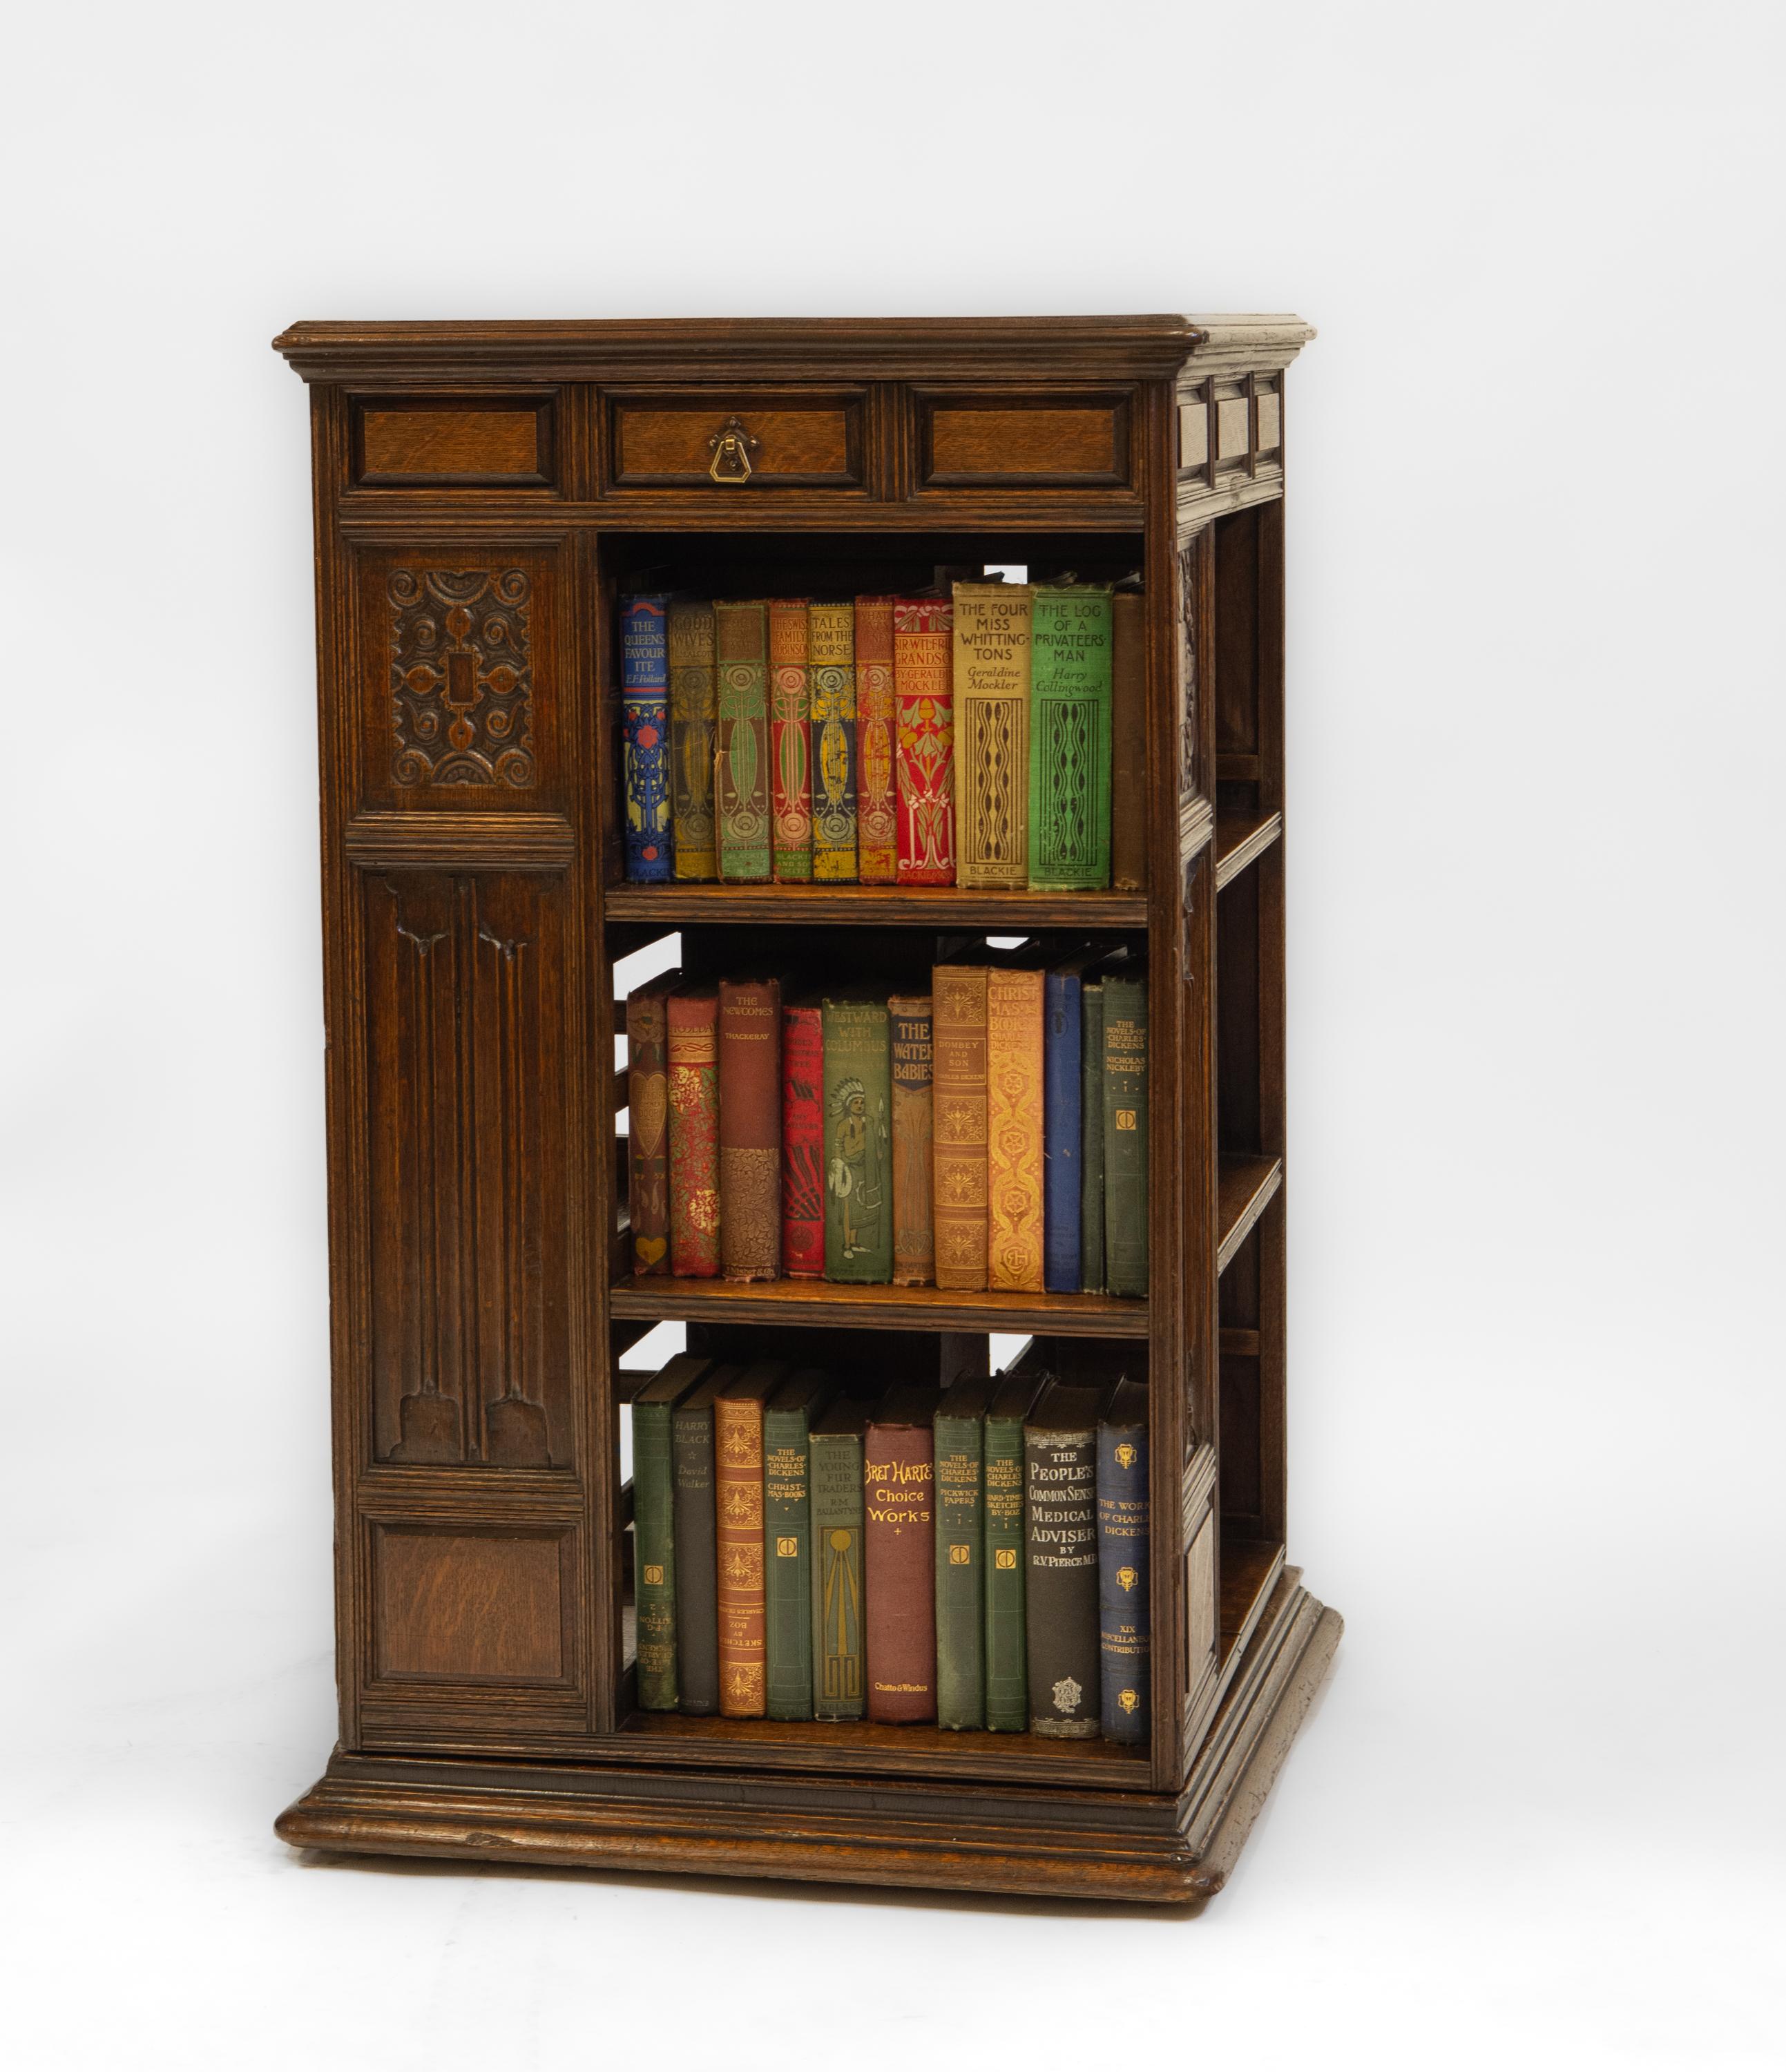 Superb 19th century large oak revolving bookcase with drawer. English - Circa 1870.  Colman's Mustard Family Provenance. Labelled. 

The bookcase is of very good quality. A beautiful and unusual variation on the more ubiquitous slatted design, each